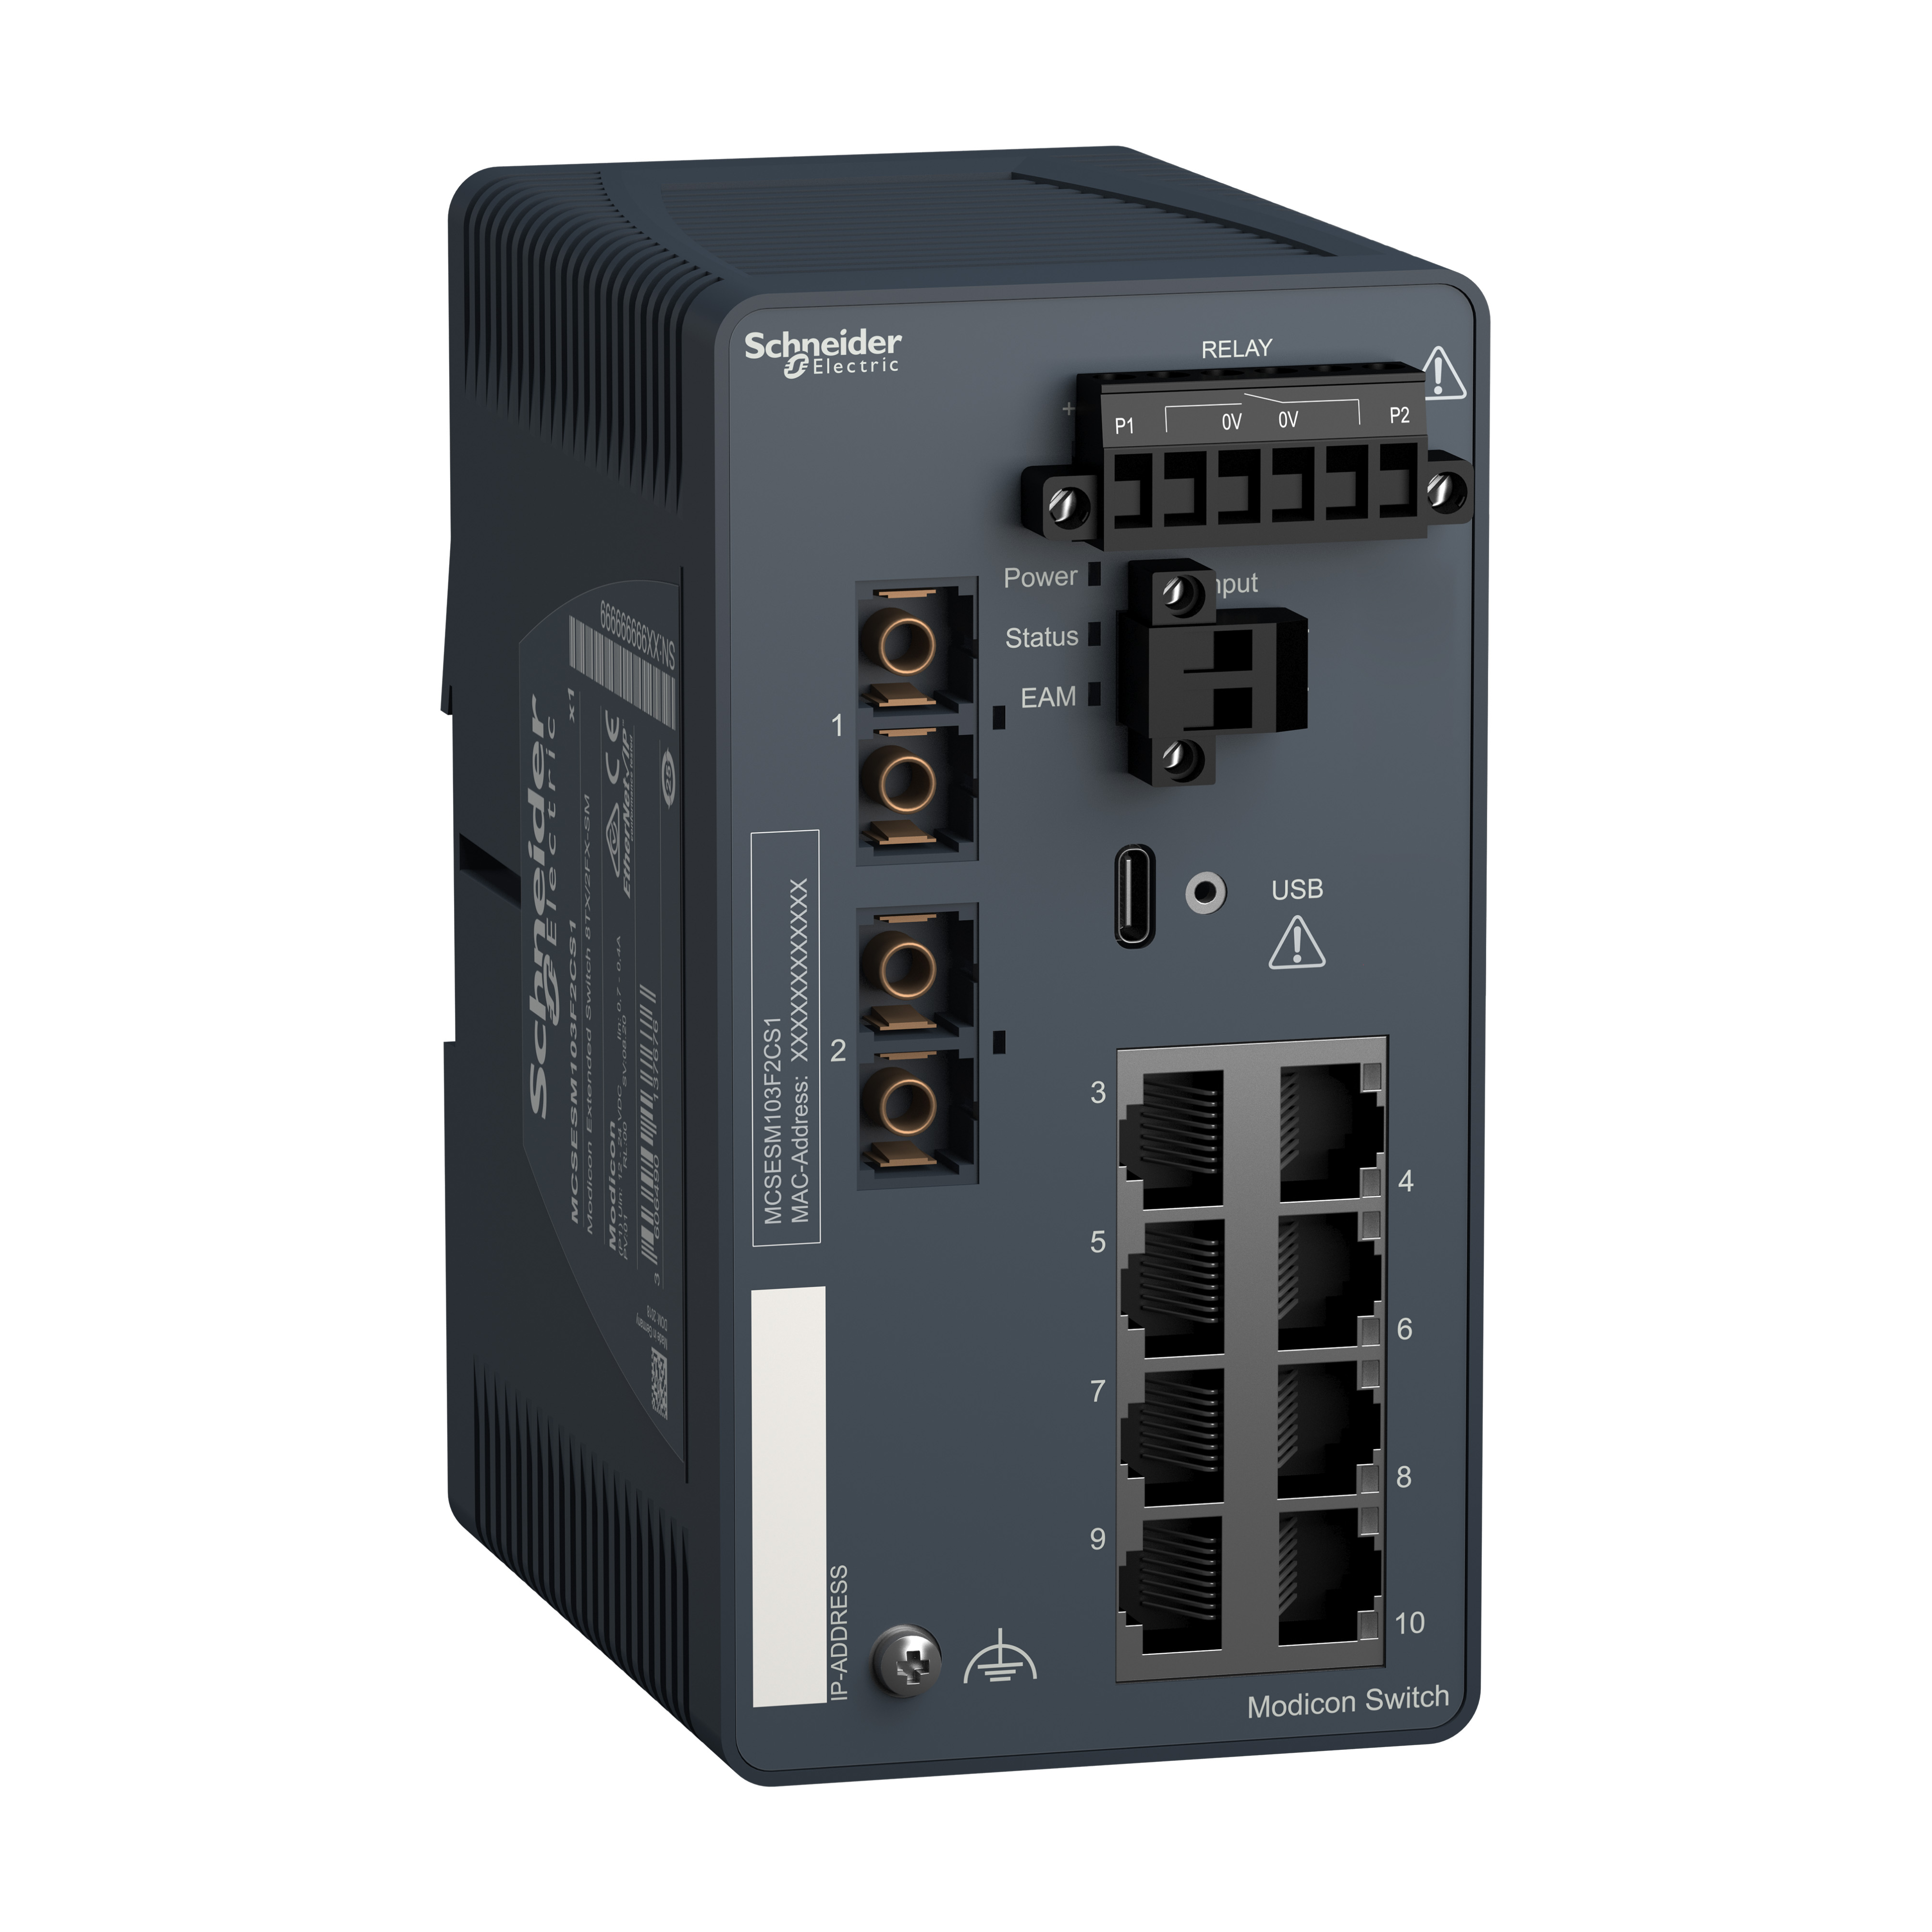 Modicon Extended Managed Switch - 8 ports for copper + 2 ports for fiber optic single-mode